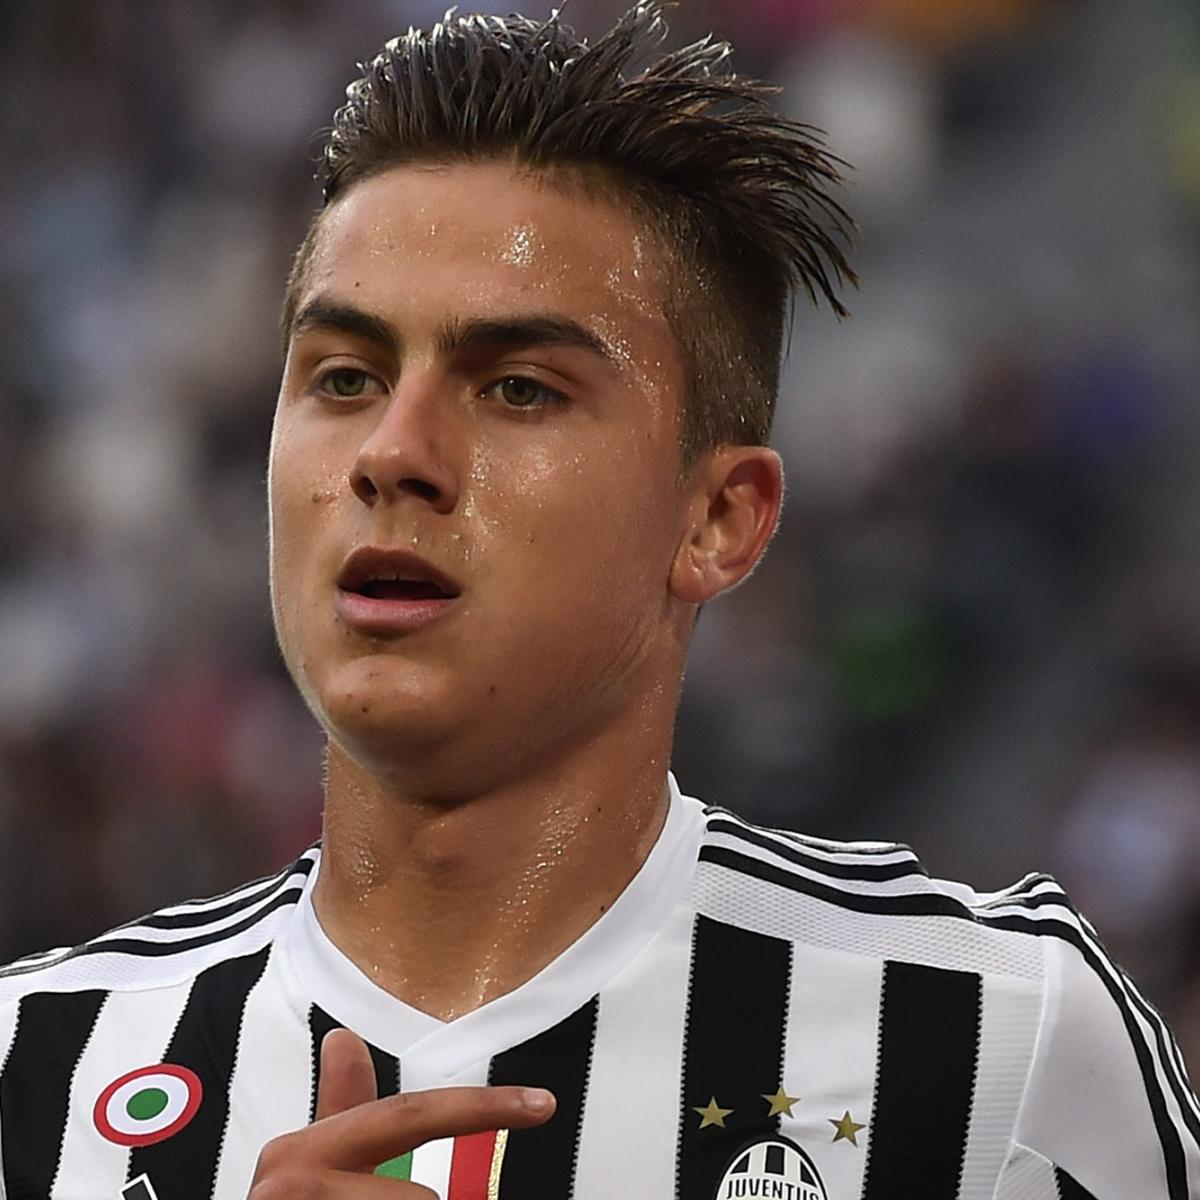 Lionel Messi Says Juventus Striker Paulo Dybala Has a Bright Future Ahead of Him ...